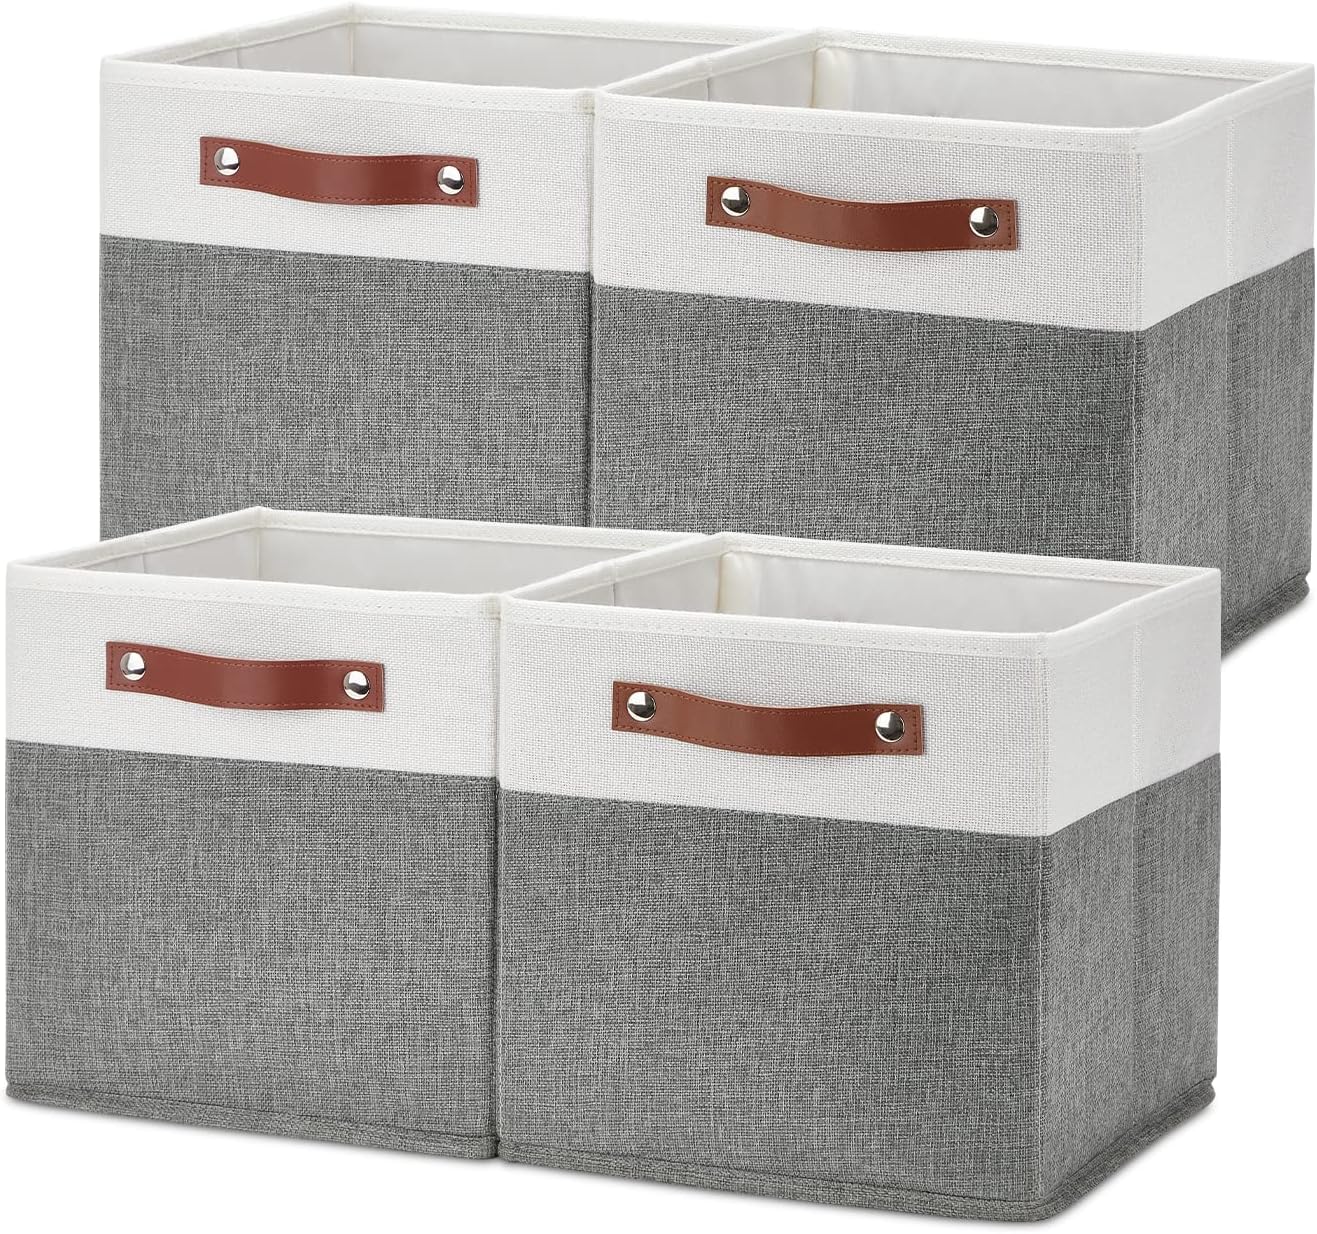 Temary Cube Storage Bins 4 Pack Storage Cubes 1111 Fabric Storage Bins Foldable Cube Storage Baskets with Handles, Collapsible Storage Basket for Shelf (White & Grey, 11 x 11 x 11)